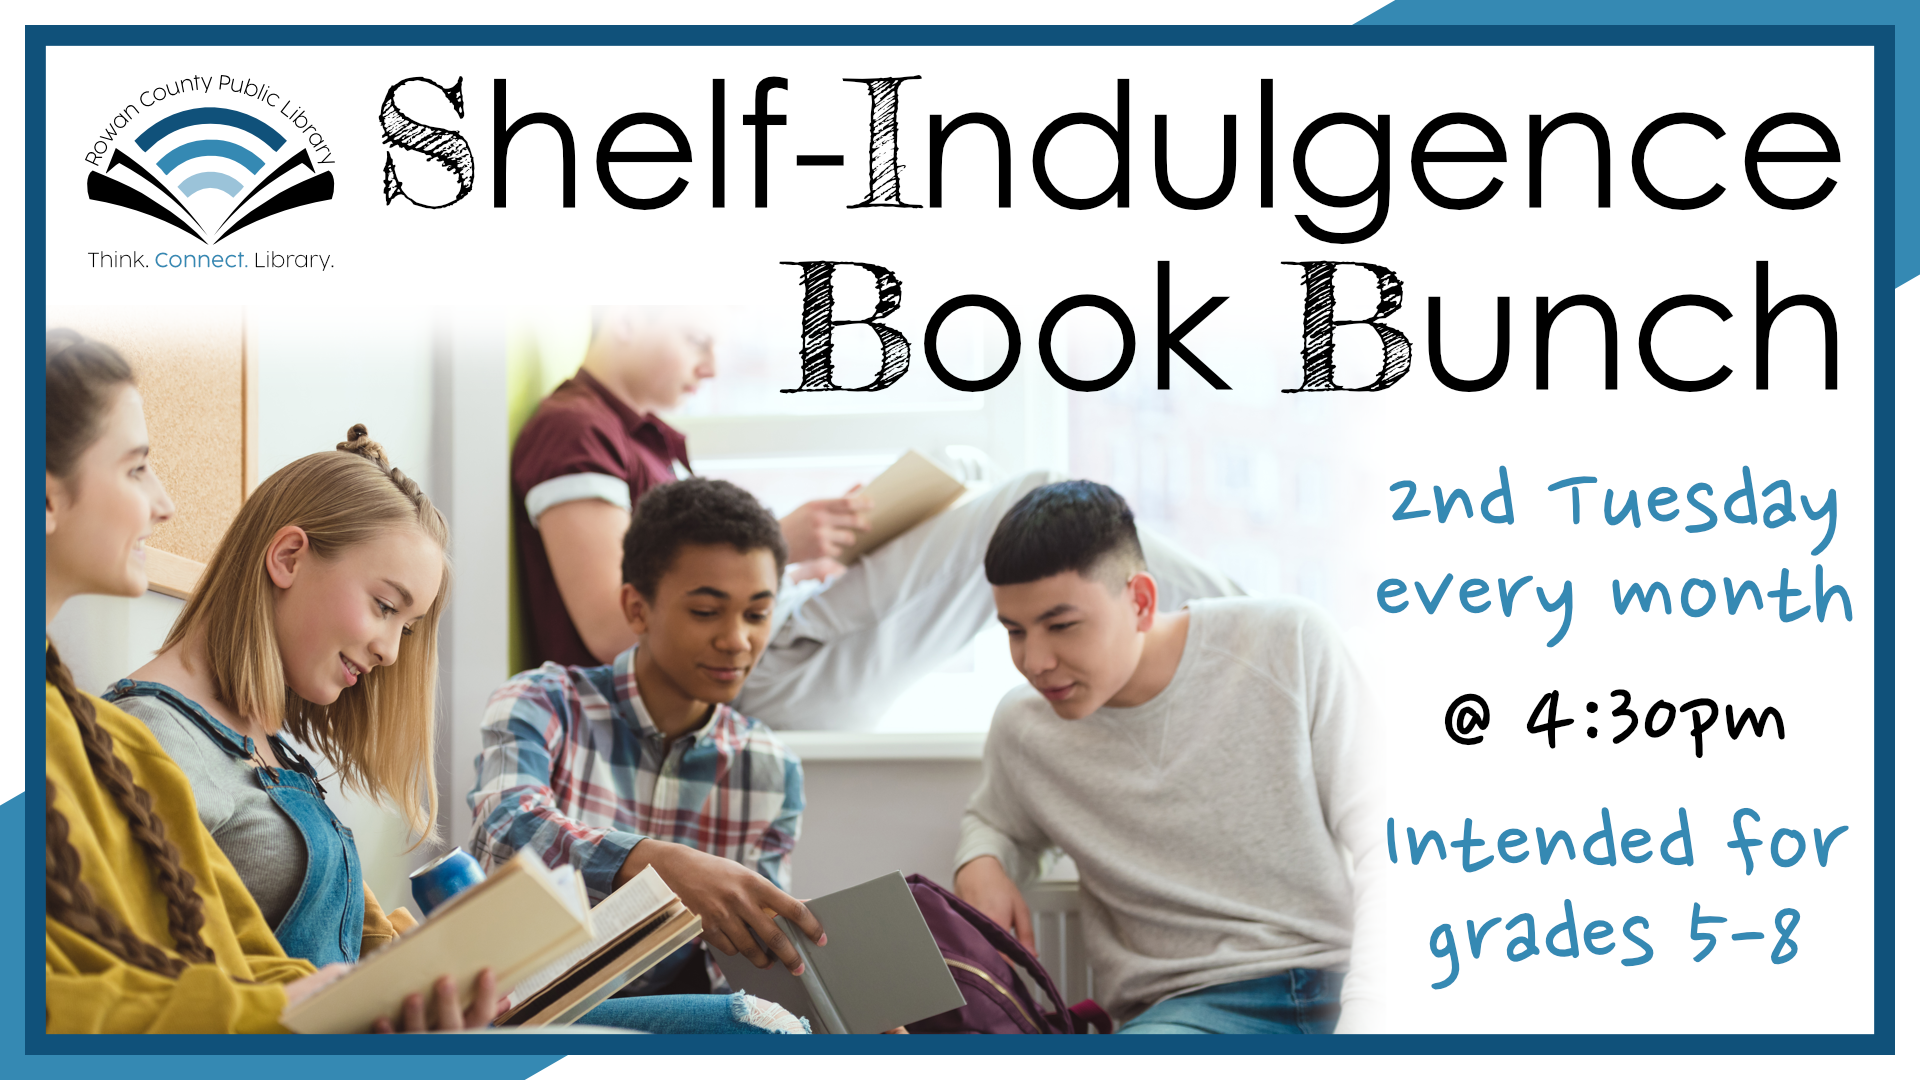 Shelf-Indulgence Book Bunch, second Tuesday monthly at 4:30pm, intended for grades 5-8